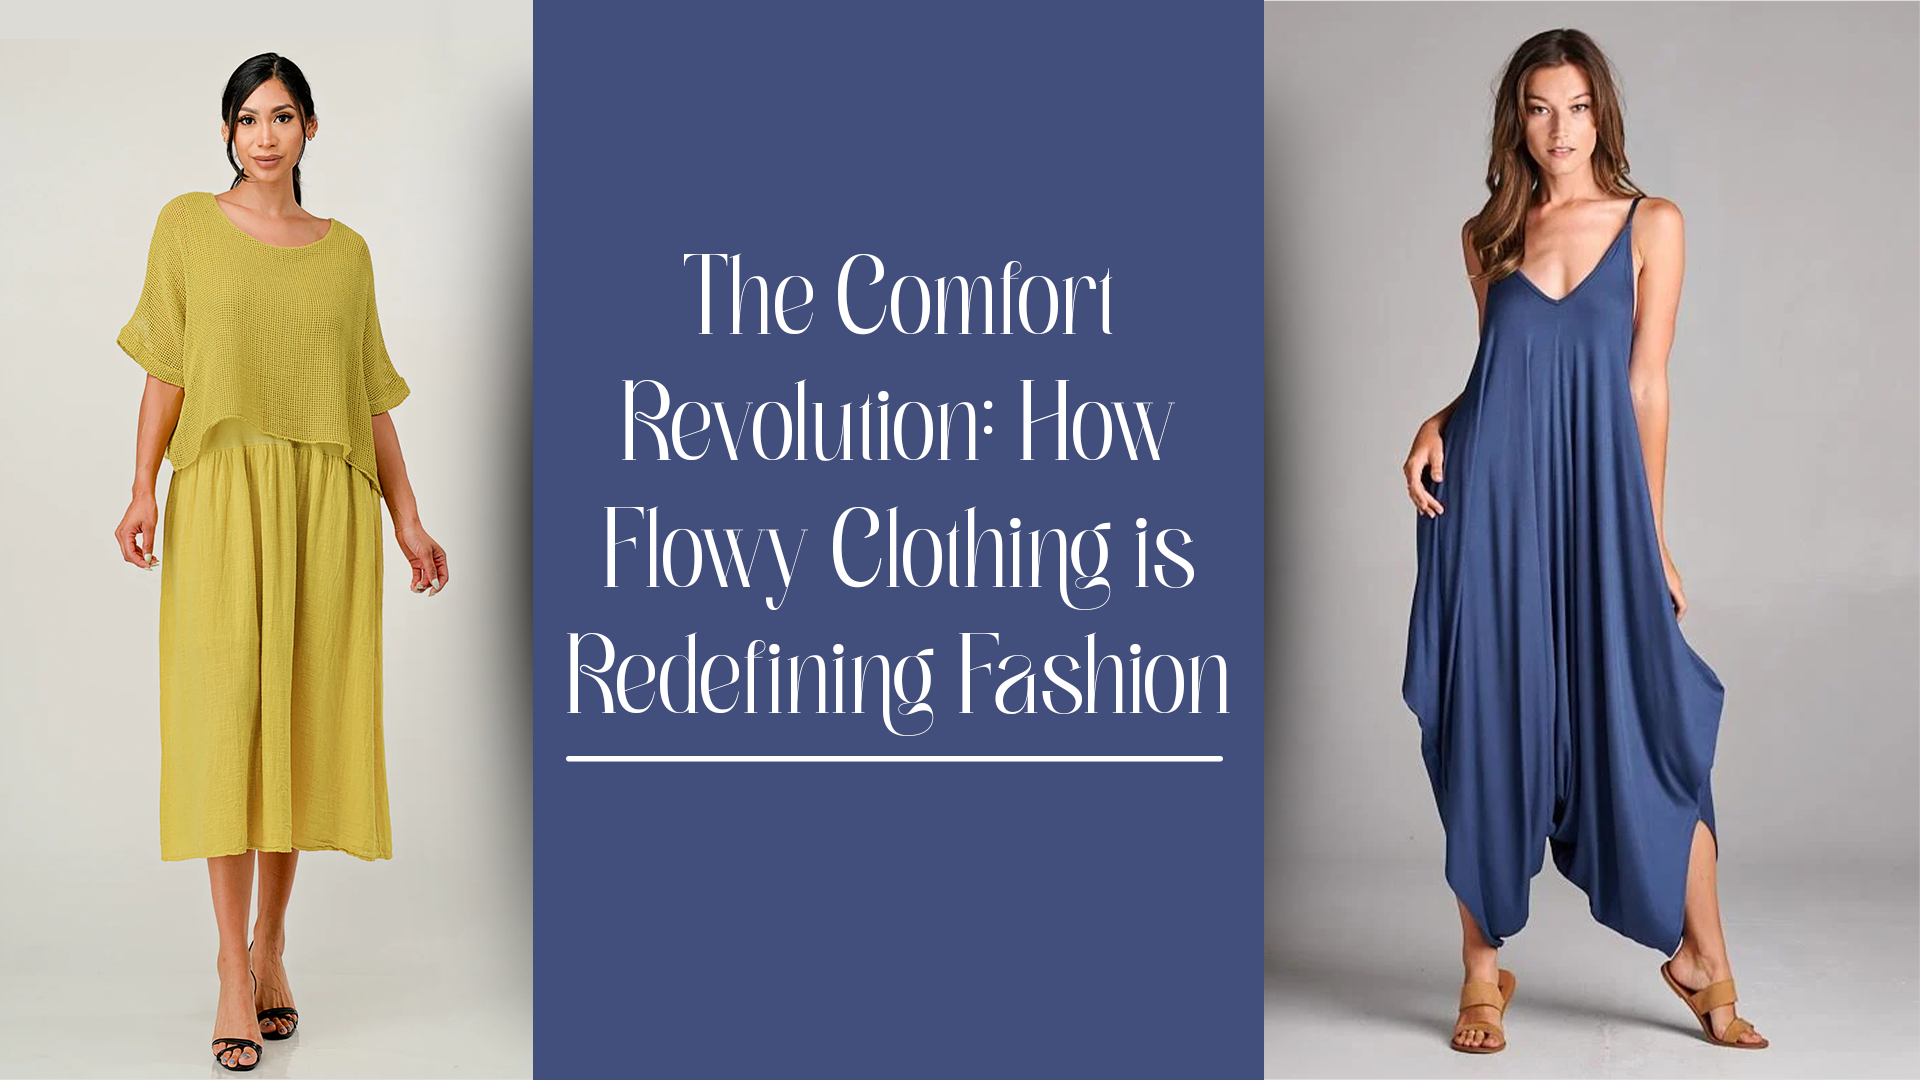 The Comfort Revolution: How Flowy Clothing is Redefining Fashion